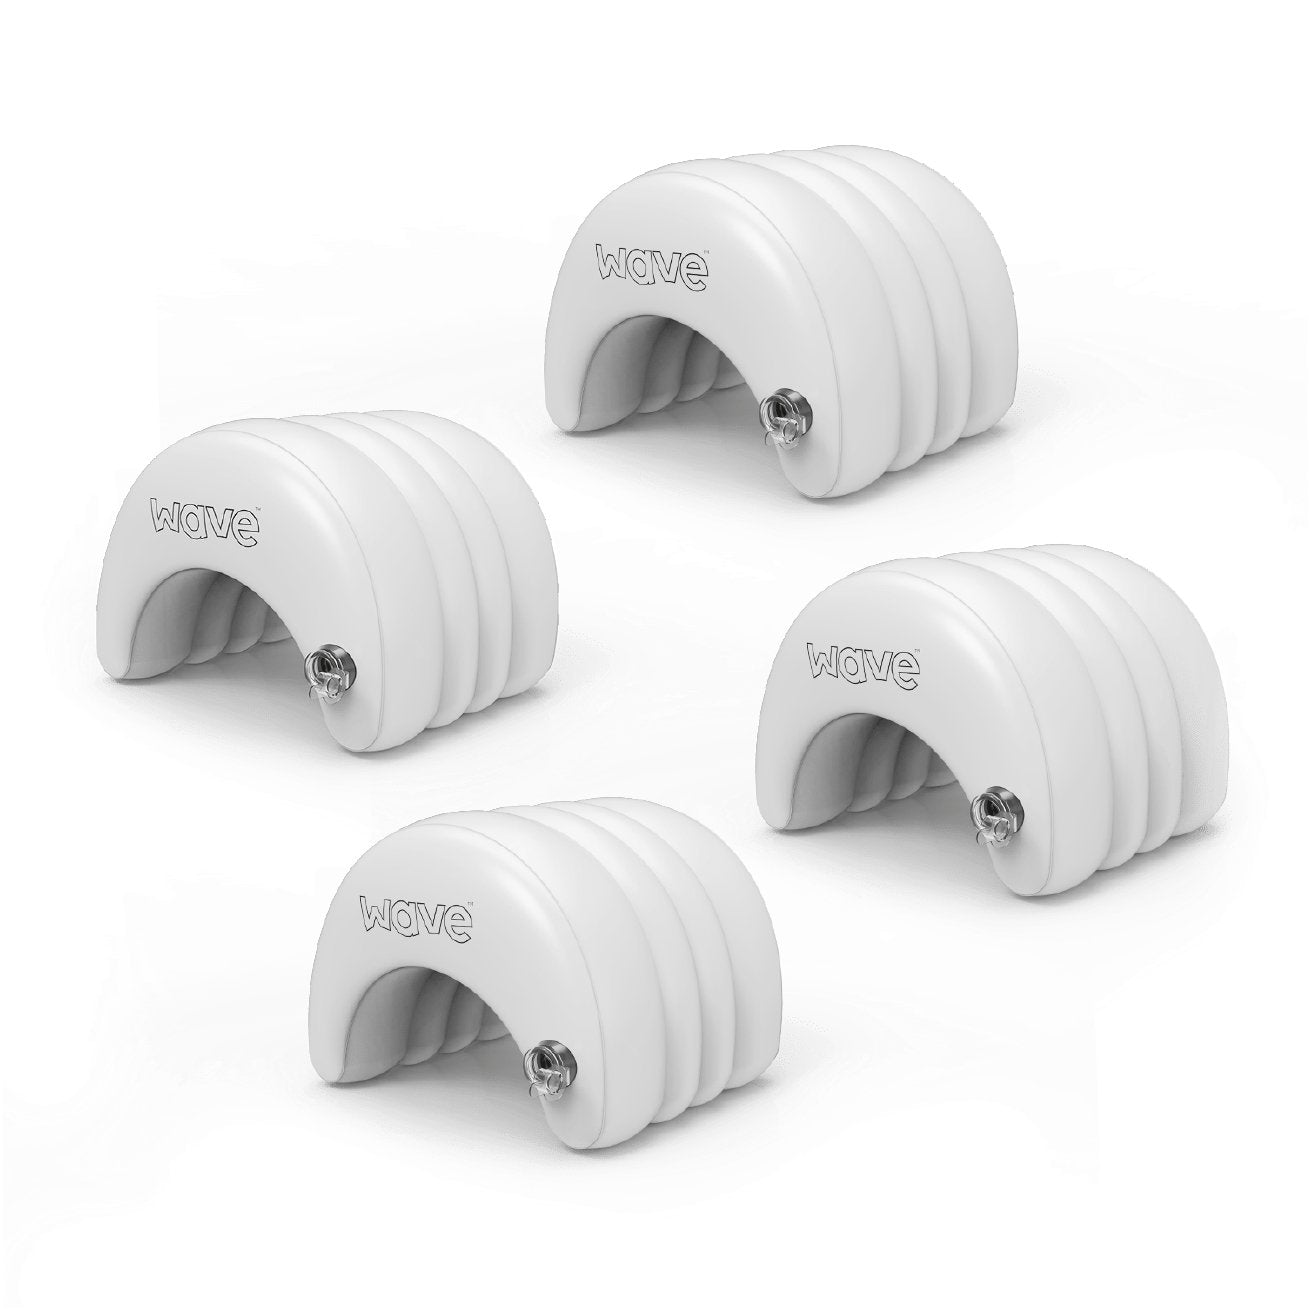 Inflatable Spa Head Rest Pillow | 4 Pack | White - Wave Spas Inflatable, foam Hot Tubs